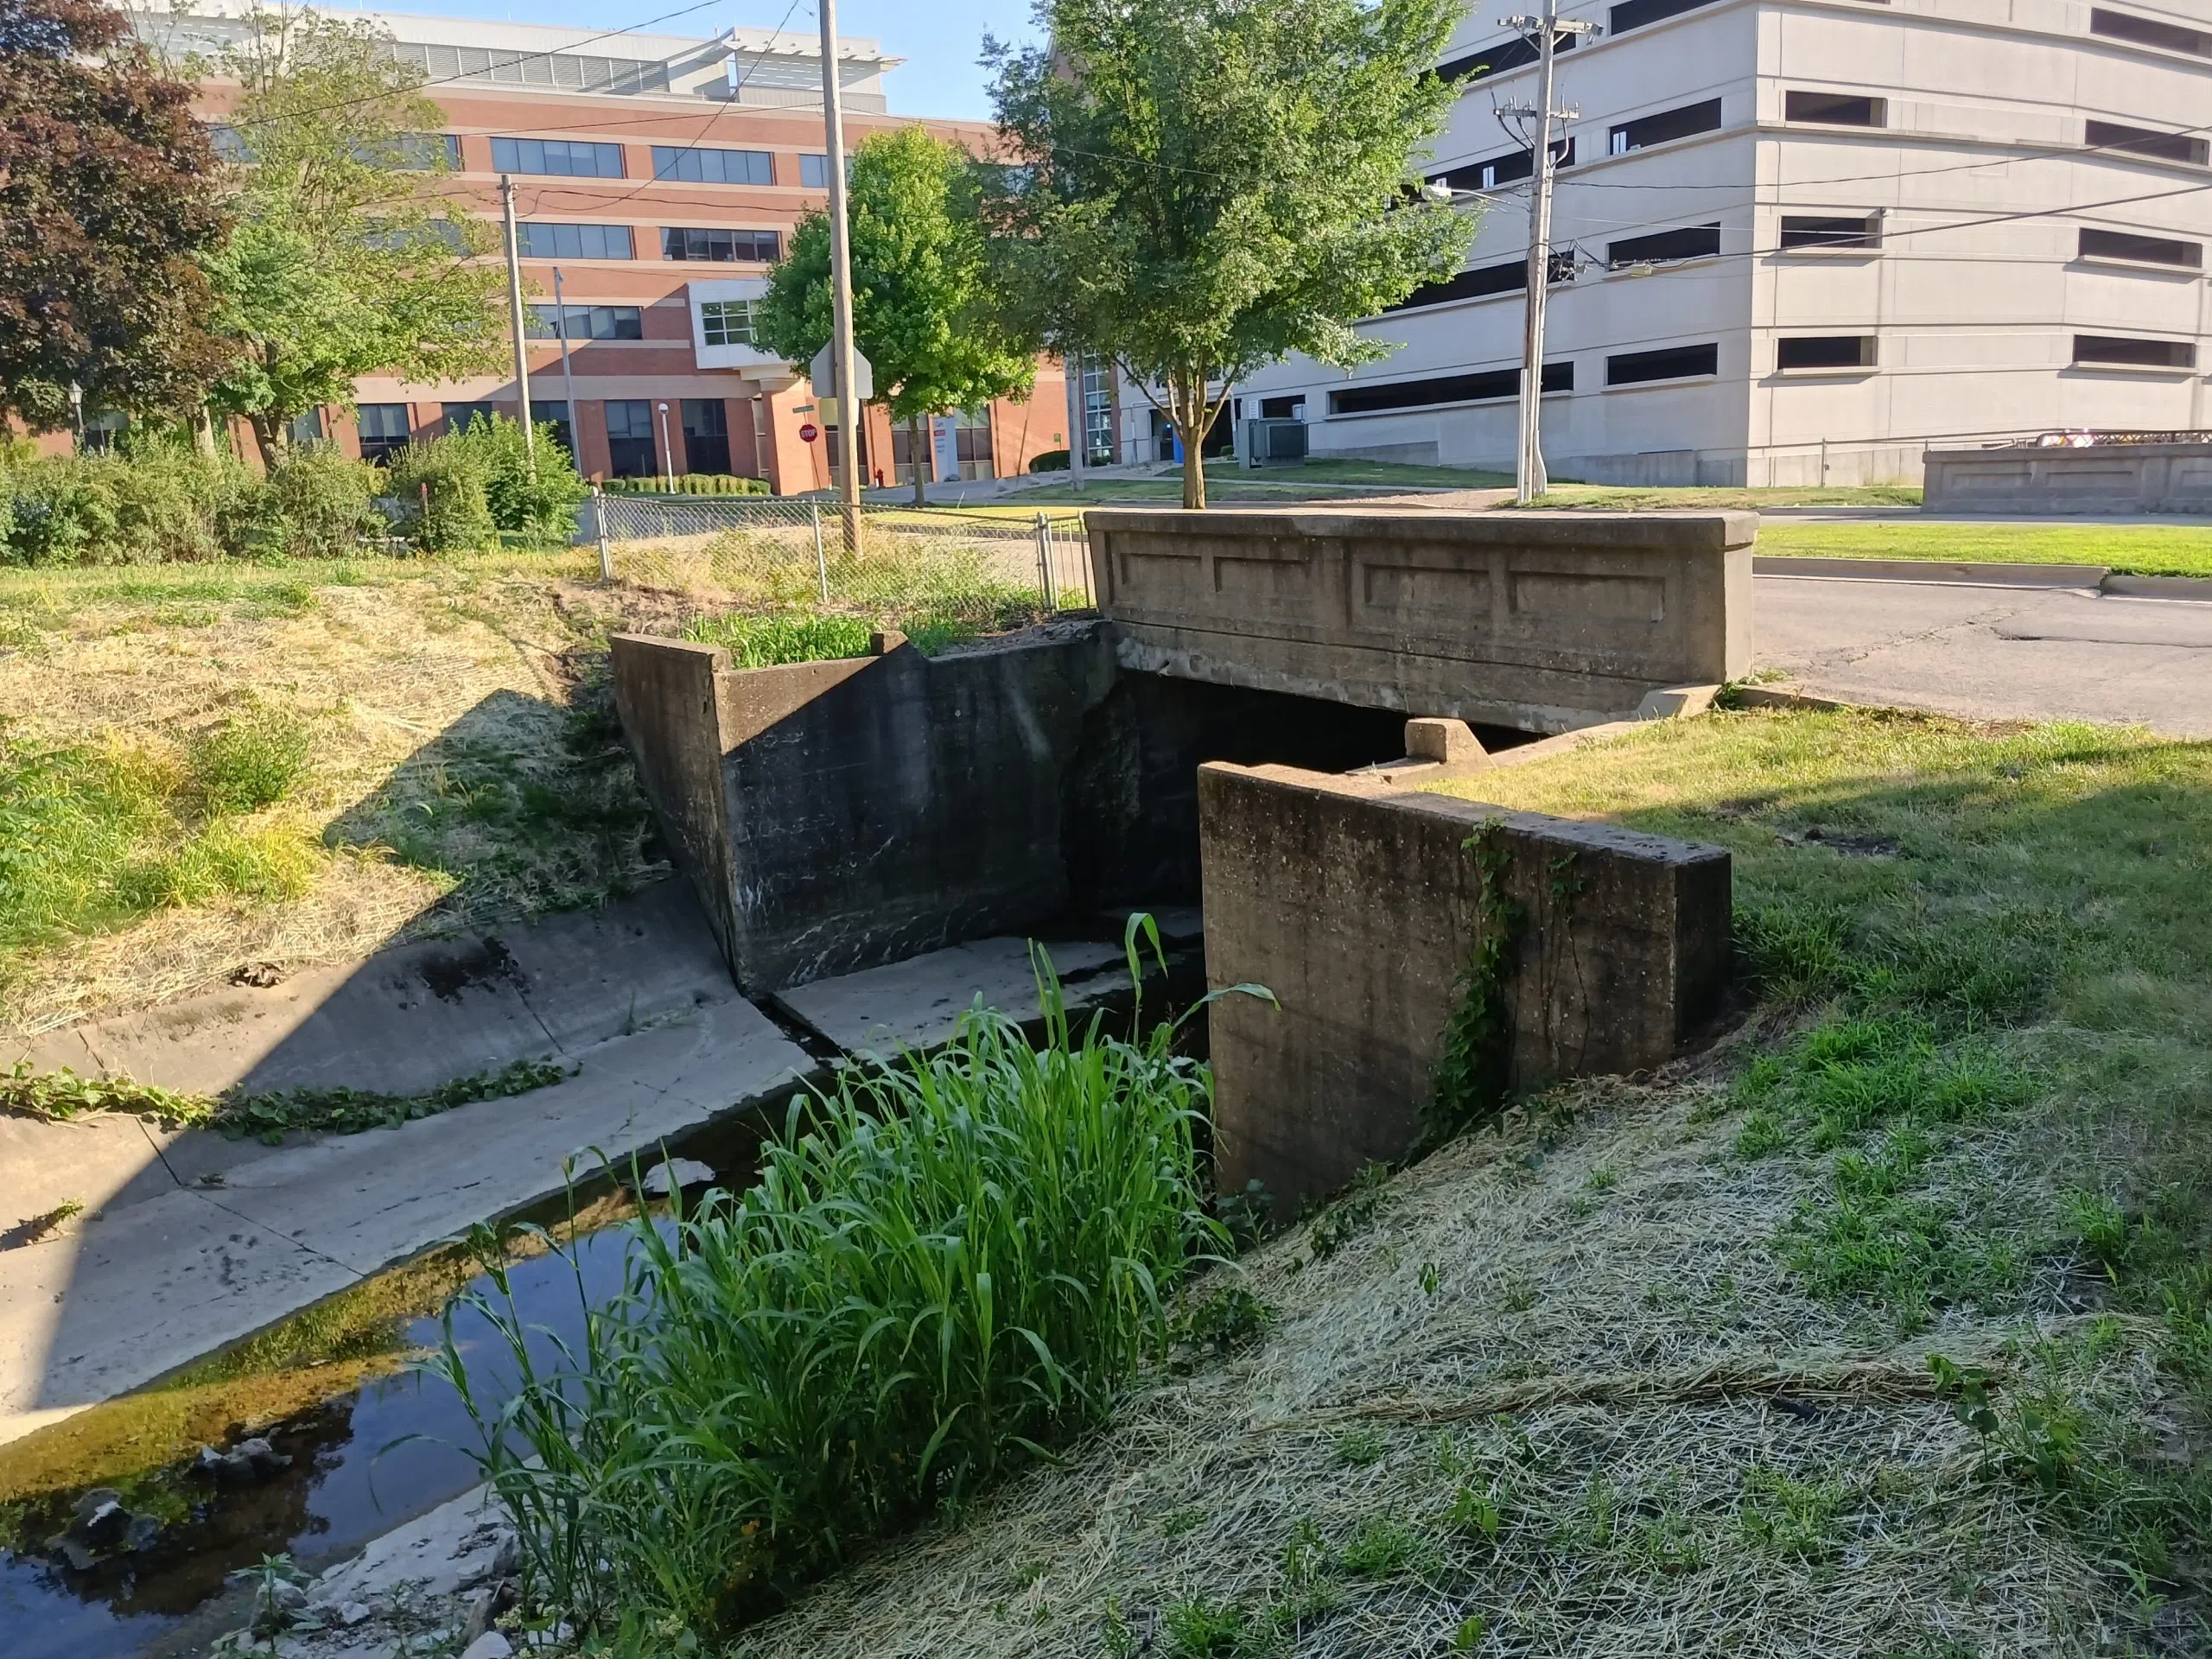 Normal Council Appropriates $203,000 for Franklin Ave. Bridge